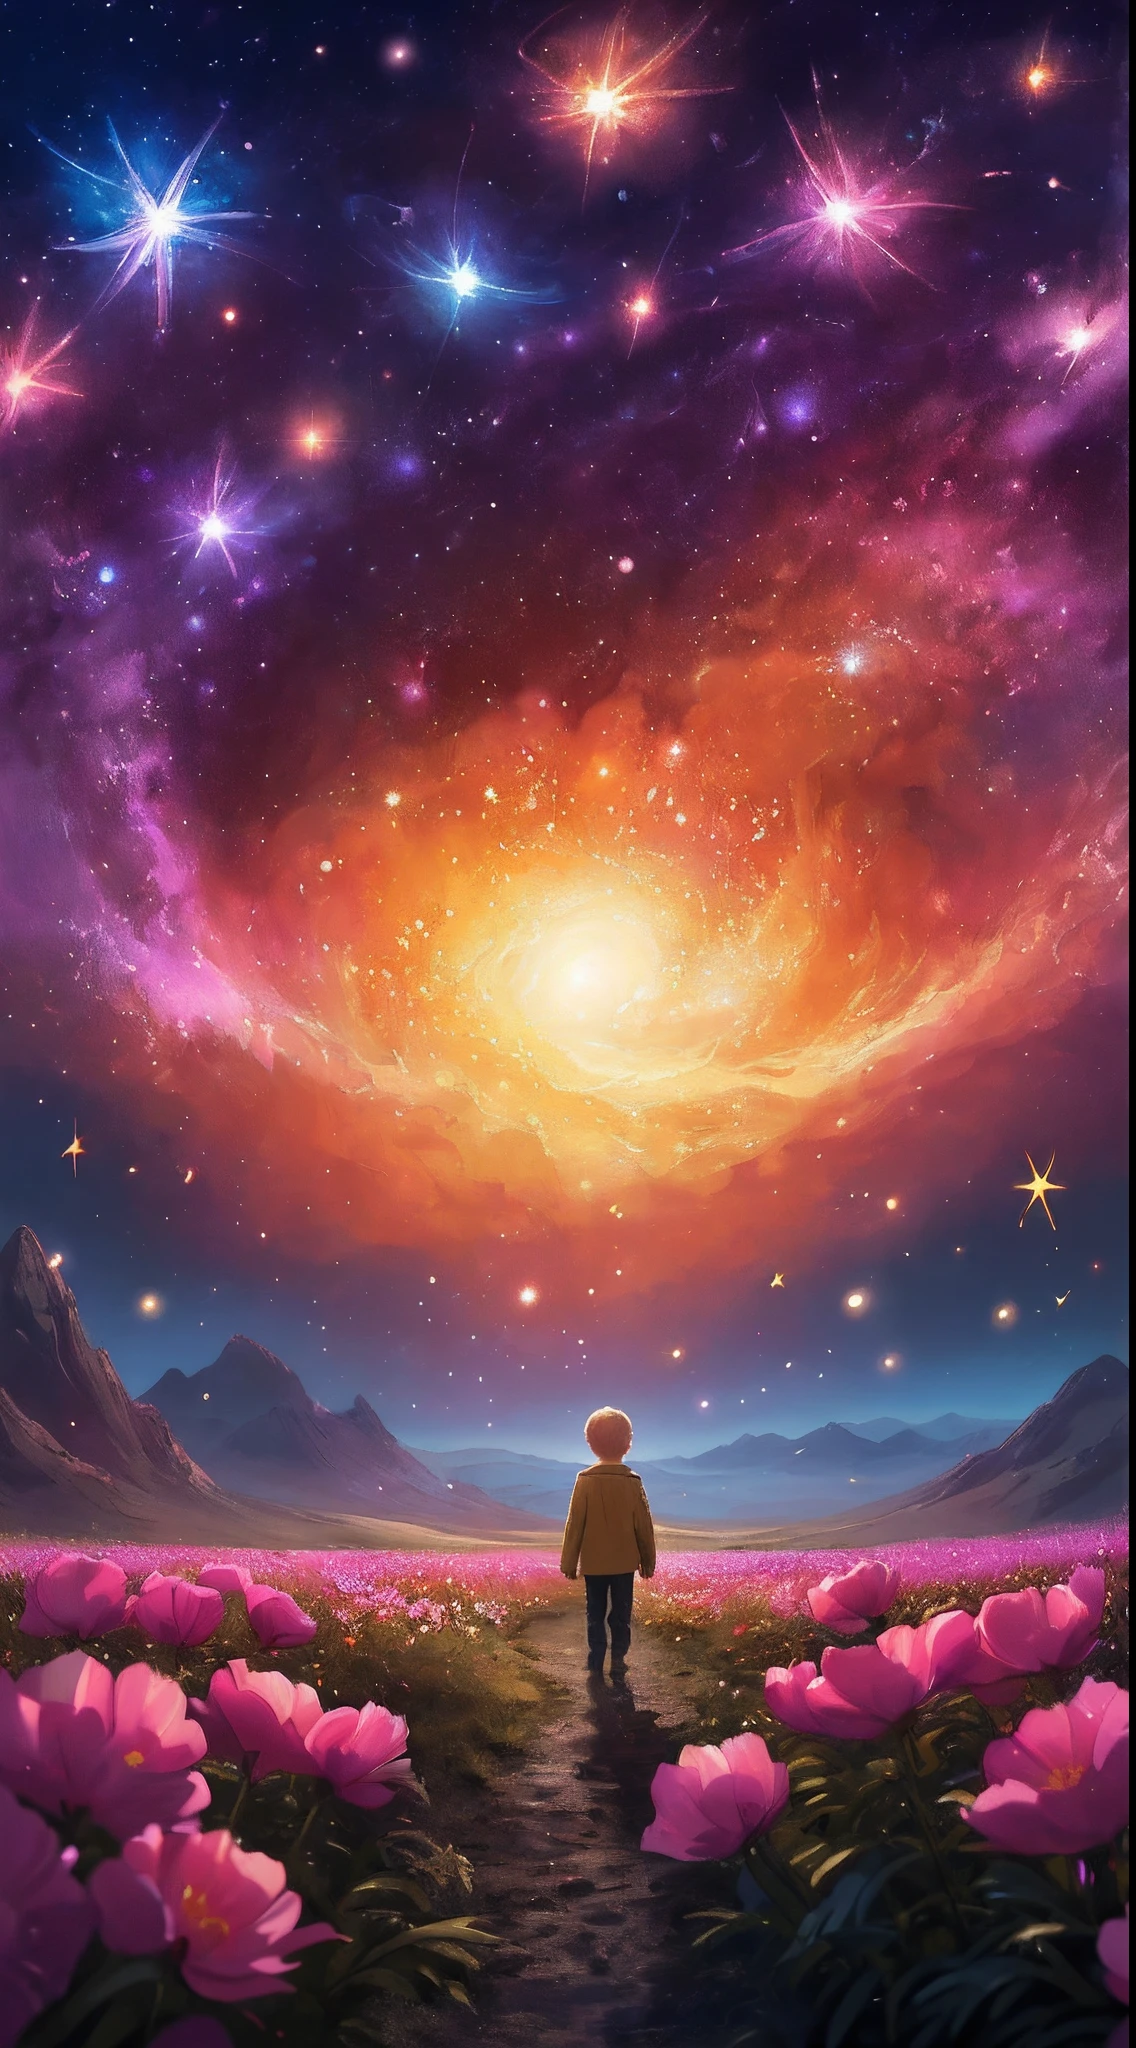 a painting of a little blonde boy walking through a field of flowers, endless cosmos in the background, looking out into the cosmos, in the cosmos, vast cosmos, imagination cosmic dream, in a cosmic field, dreamlike digital painting, in the astral plane ) ) ), on a galaxy looking background, in the universe, beautiful space, sitting on the cosmic cloudscape